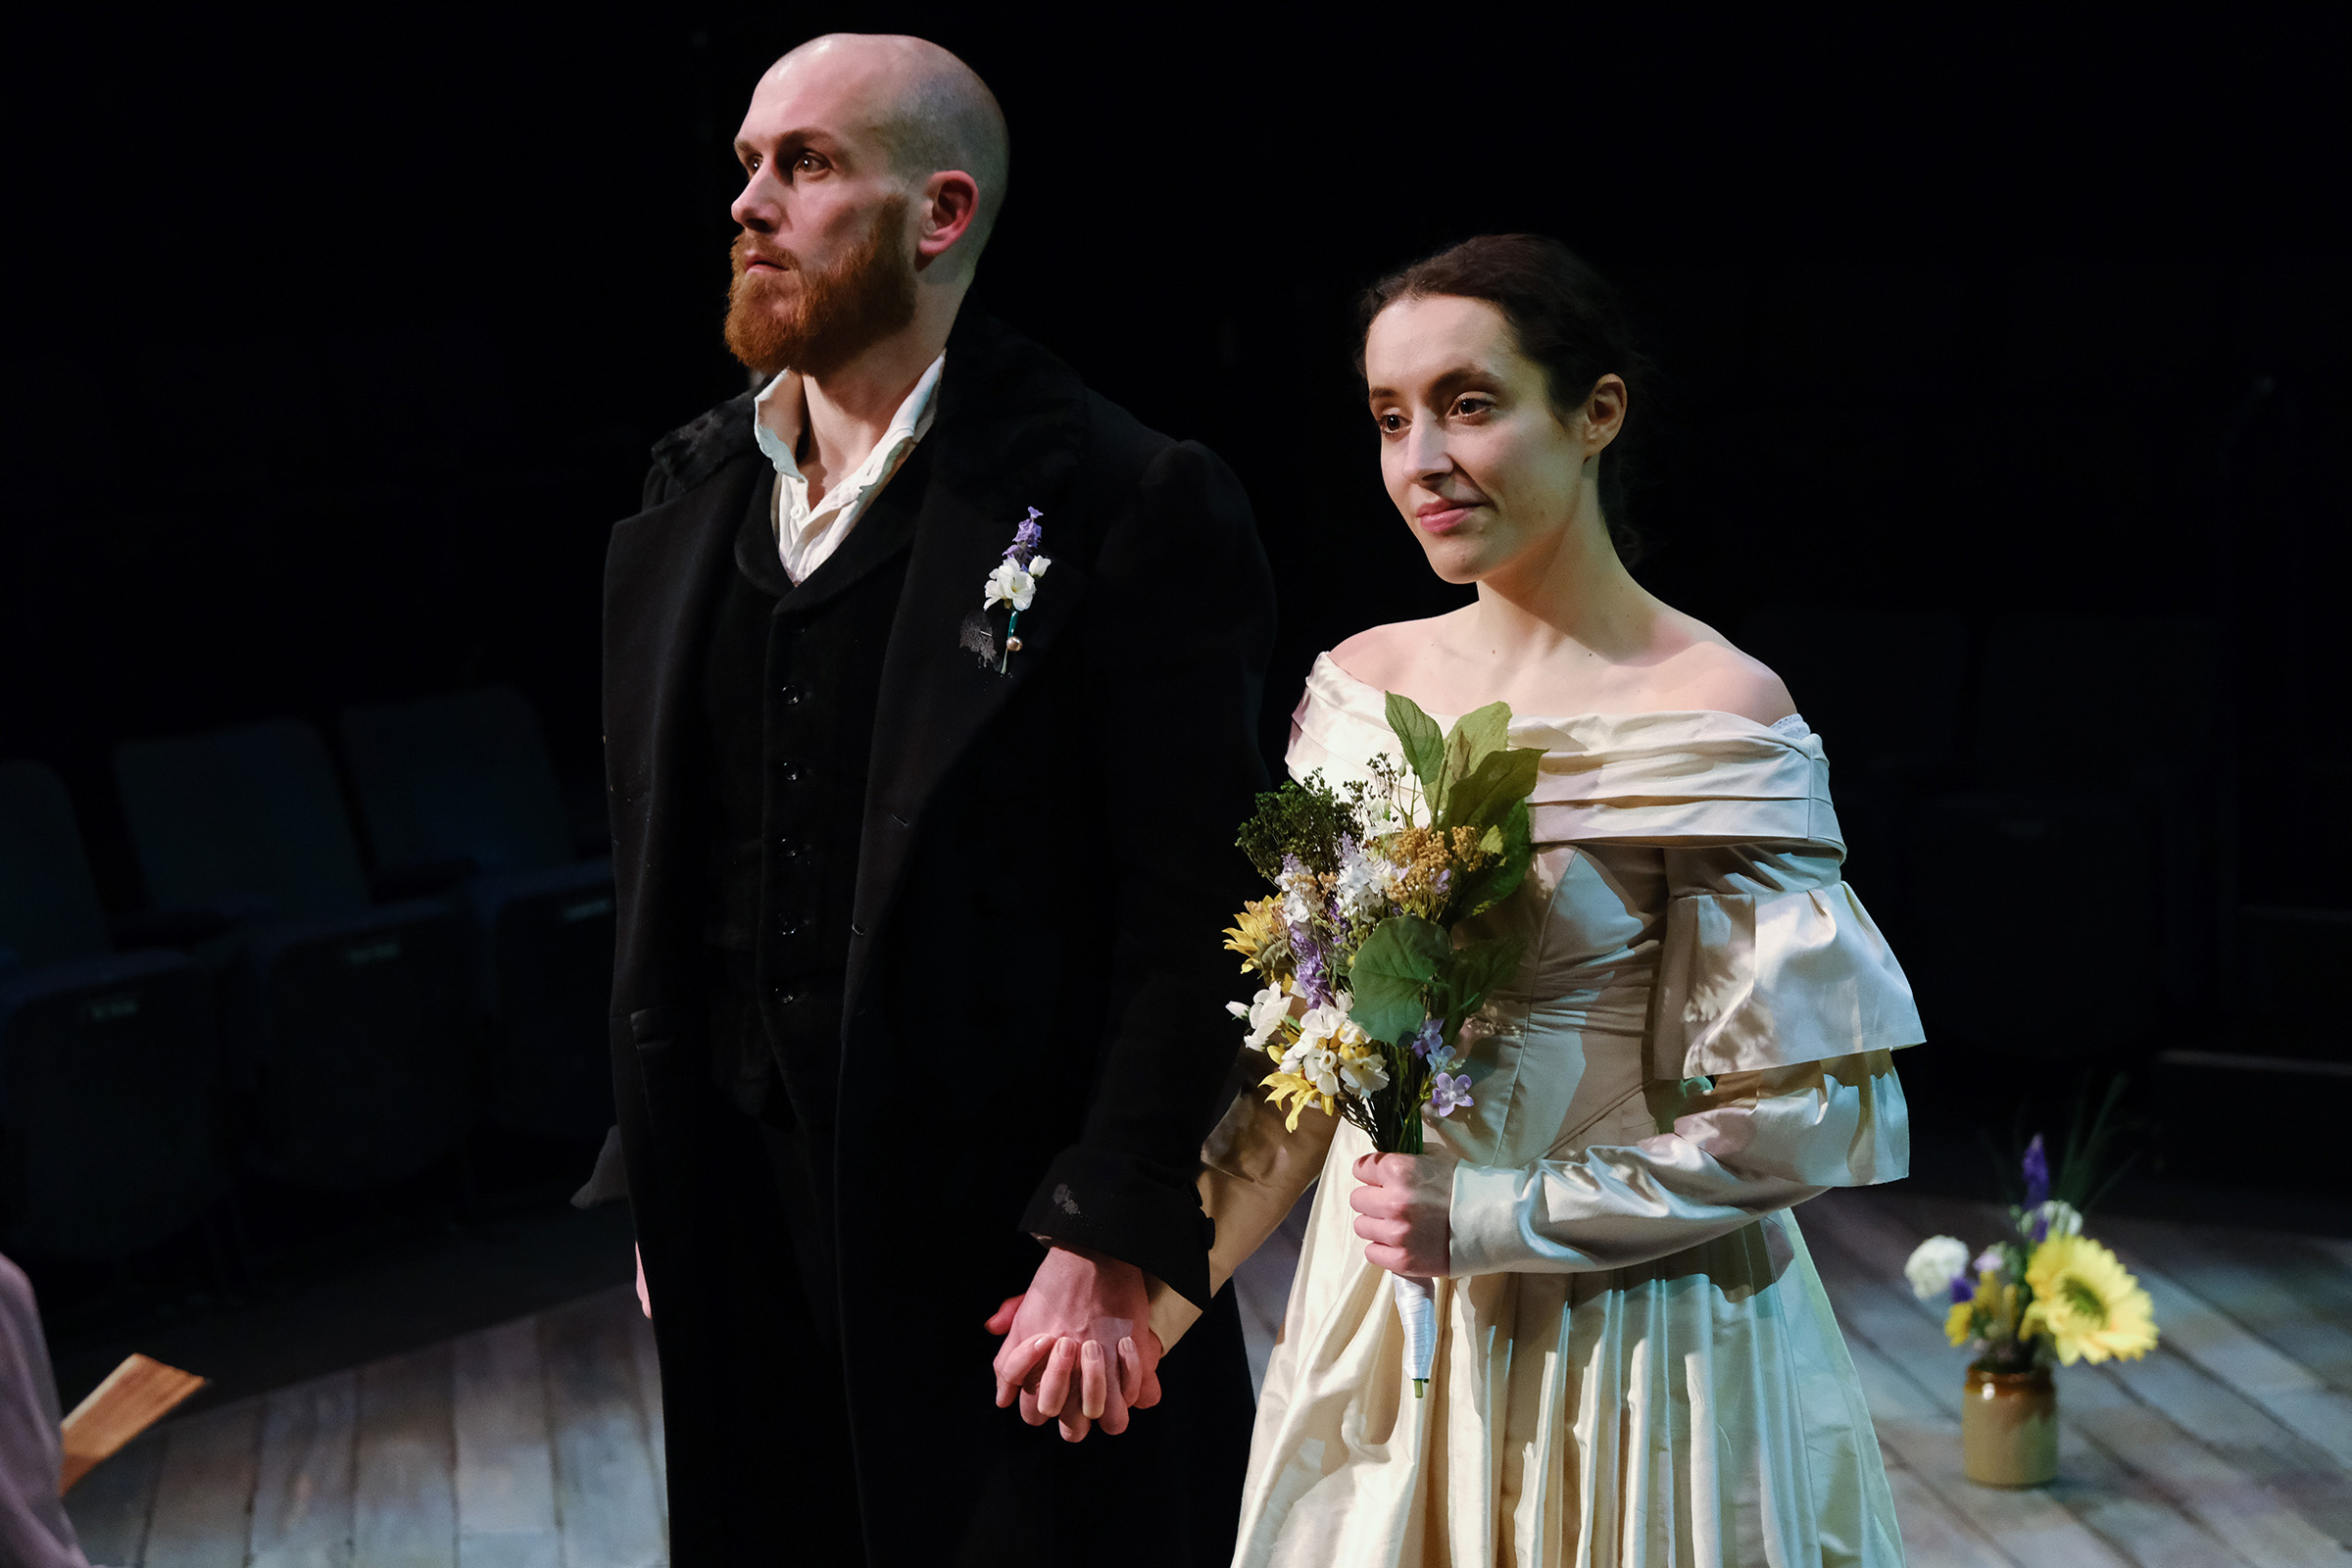 theatre performance image: Jane Eyre and Rochester are standing at the altar in wedding clothes